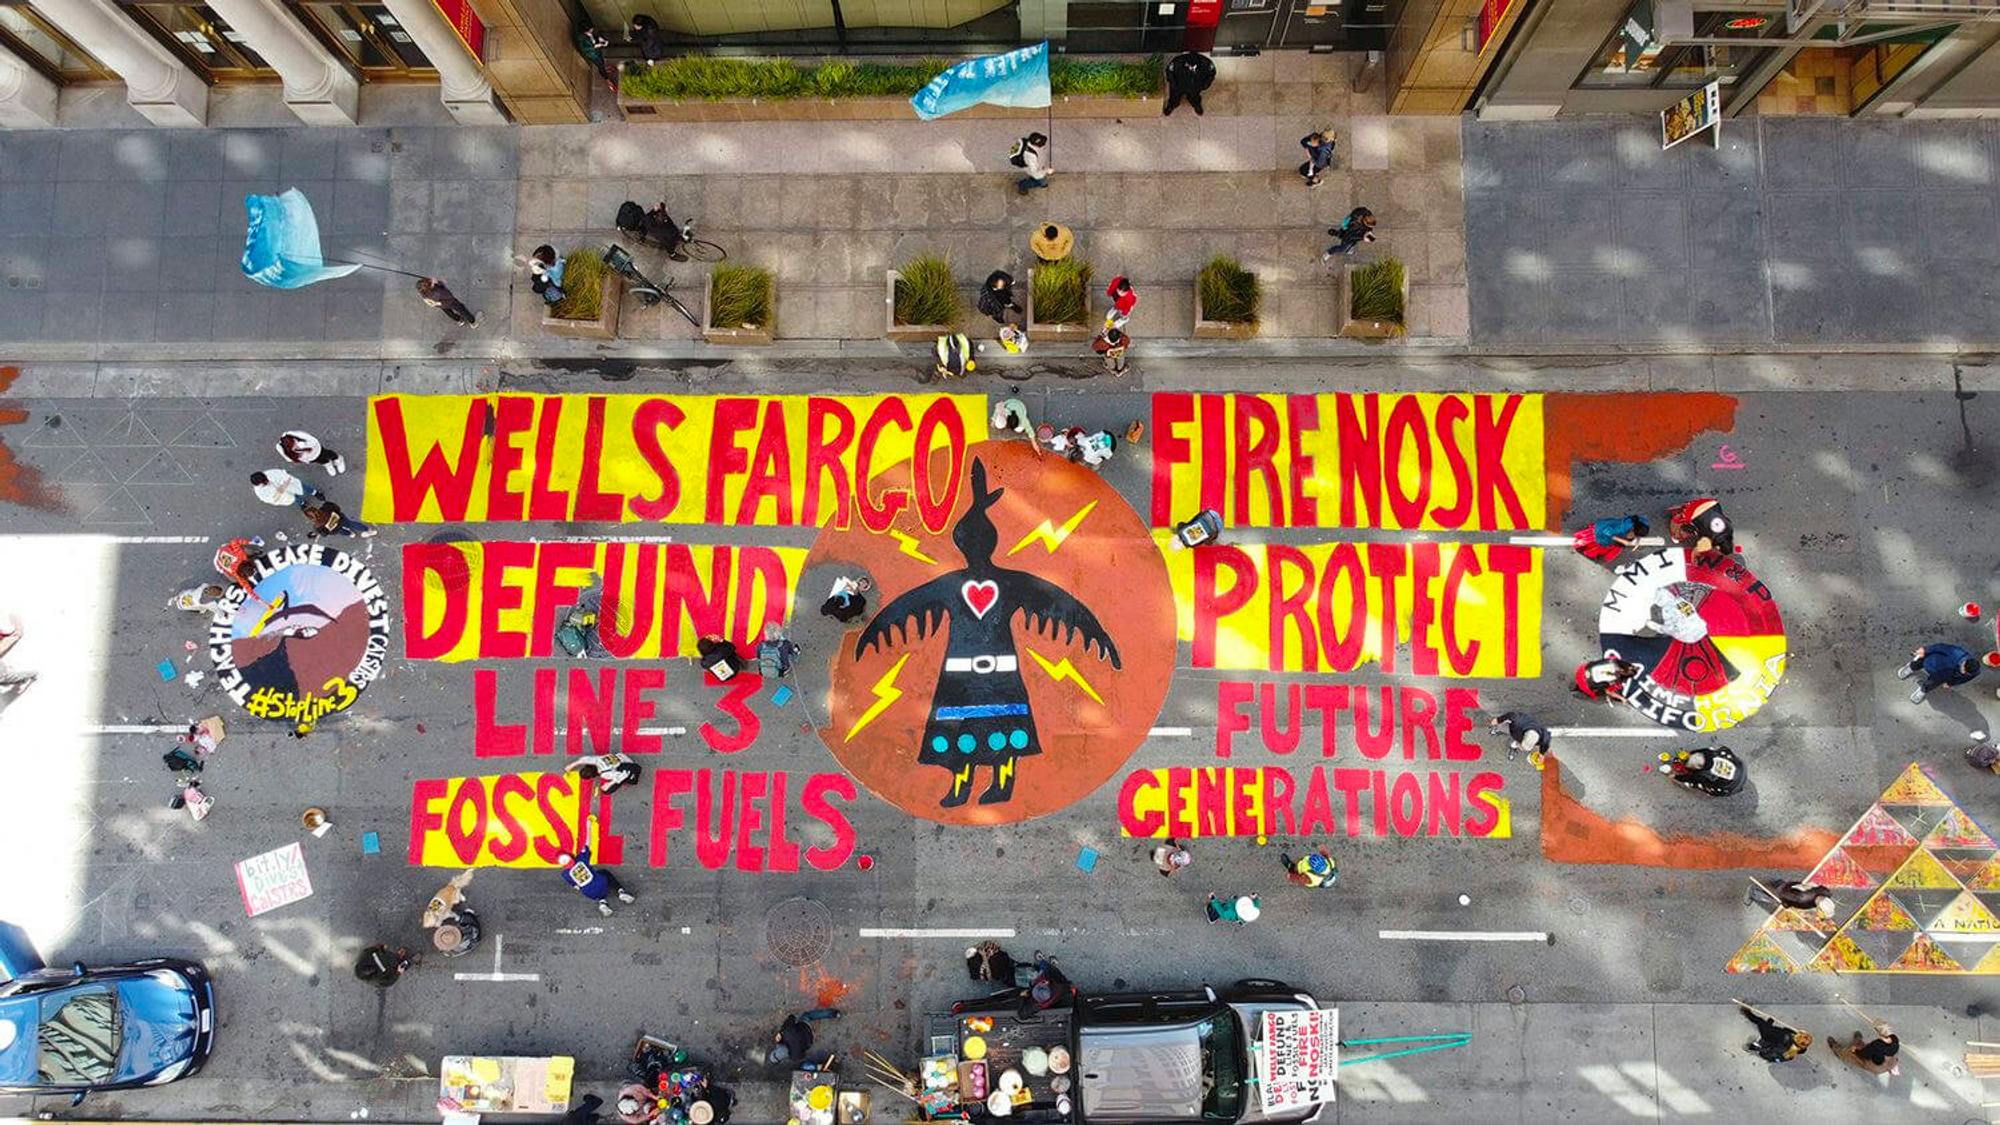 Birds eye picture of protest showing "Wells Fargo, Fire Nosk, Defund Line 3 Fossil Fueles, Protect Future Generations"